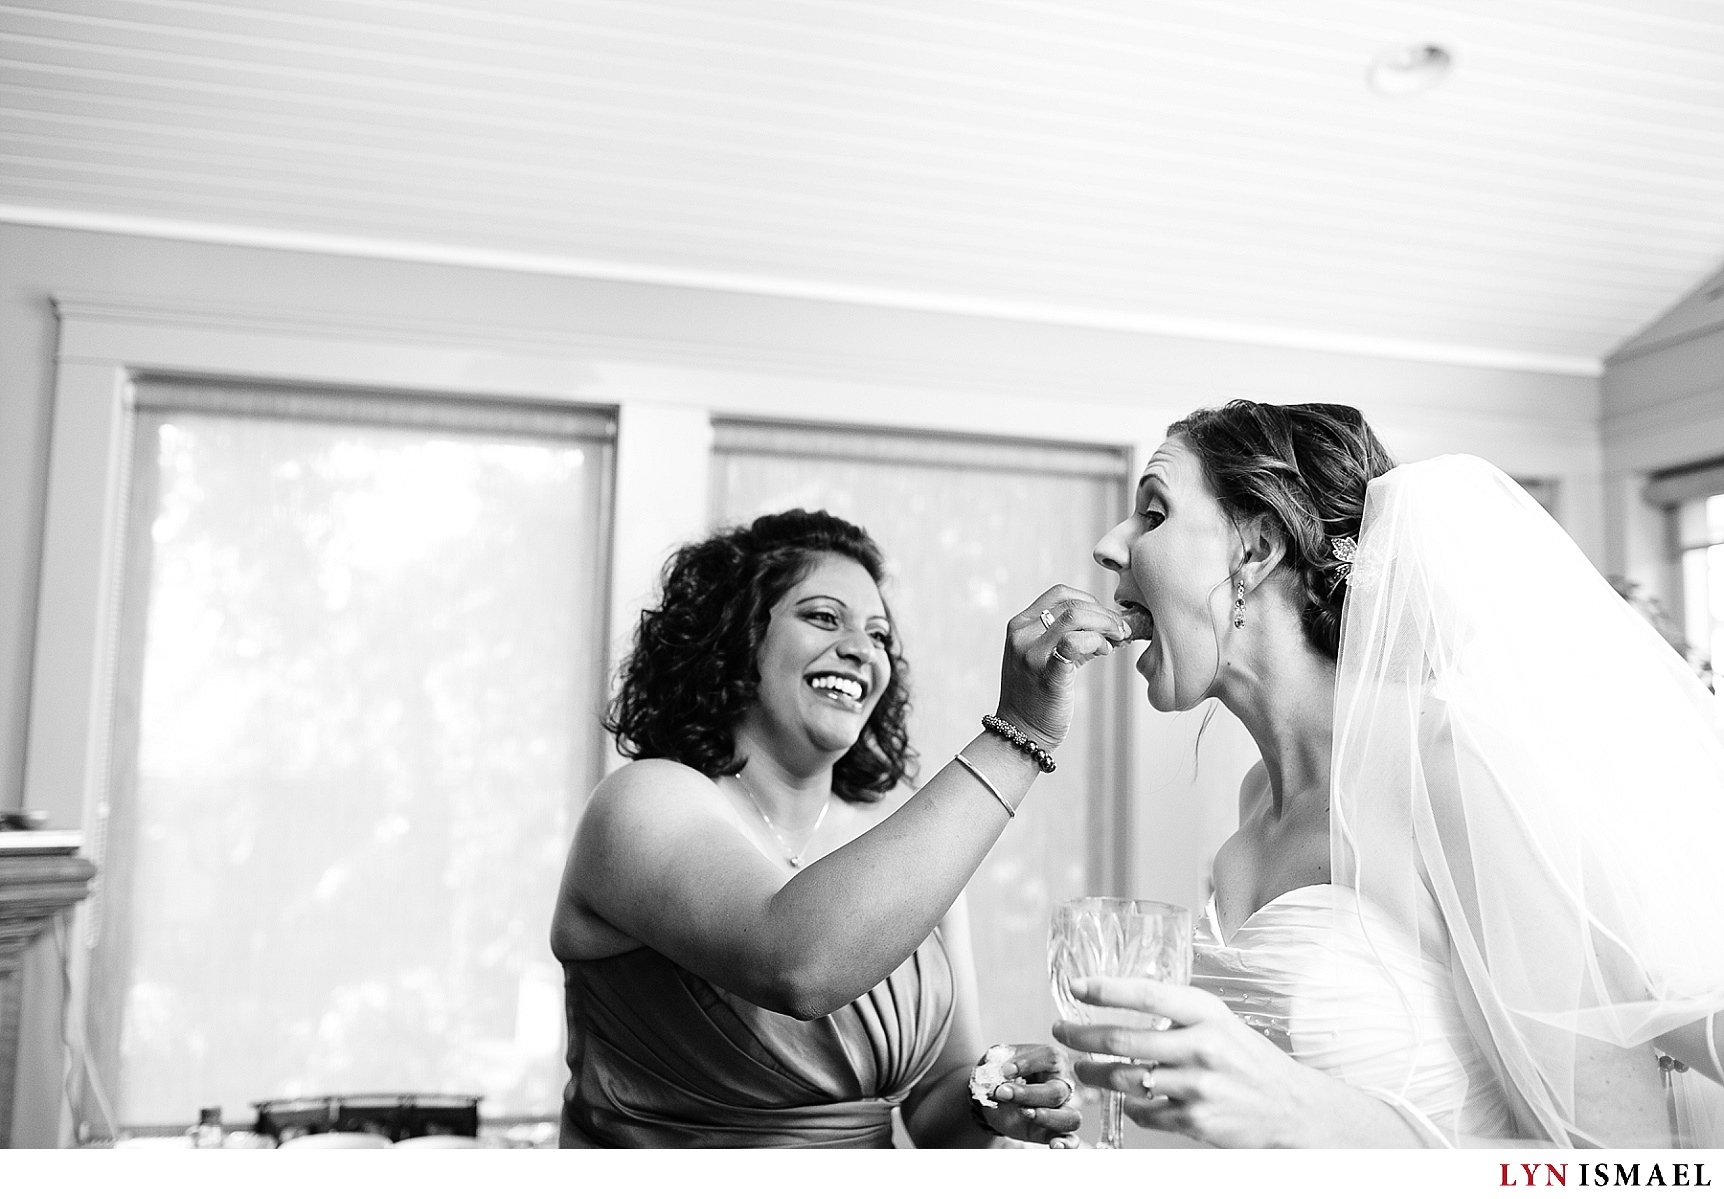 When a bride gets hungry, her bridesmaids feed her well.